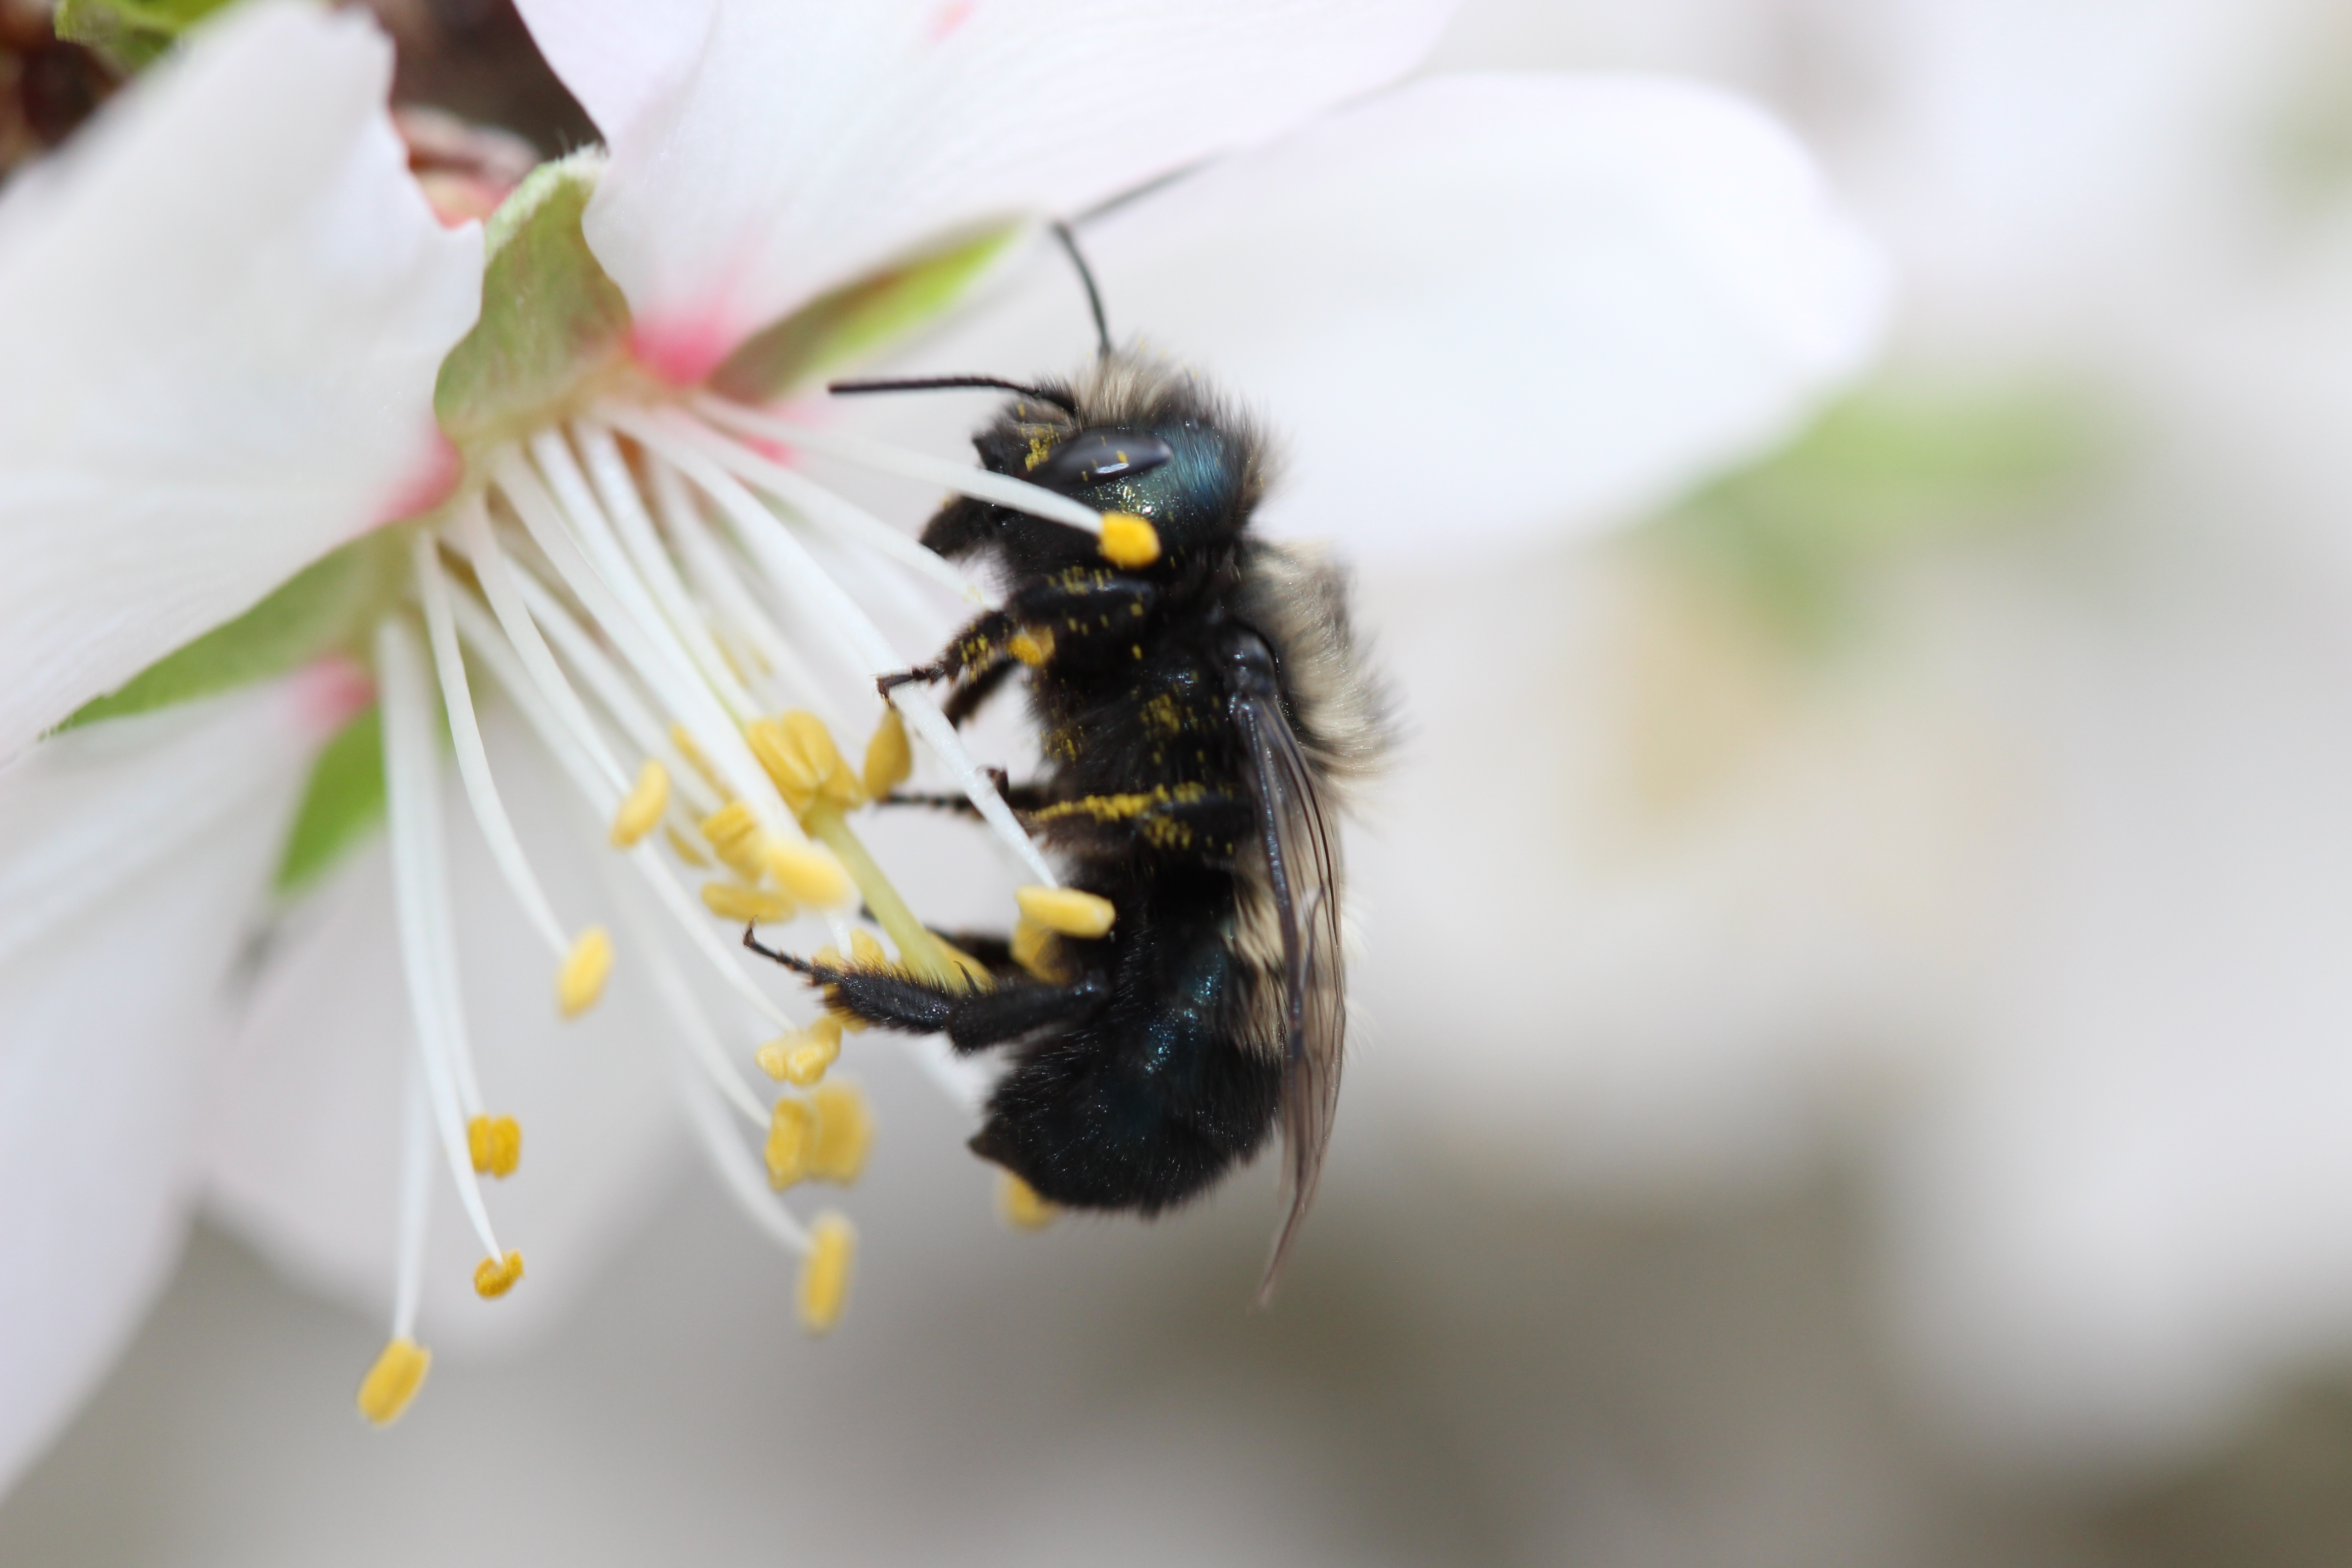 Could Blue Bees Be Better For Northwest Crops? - Northwest Public ...